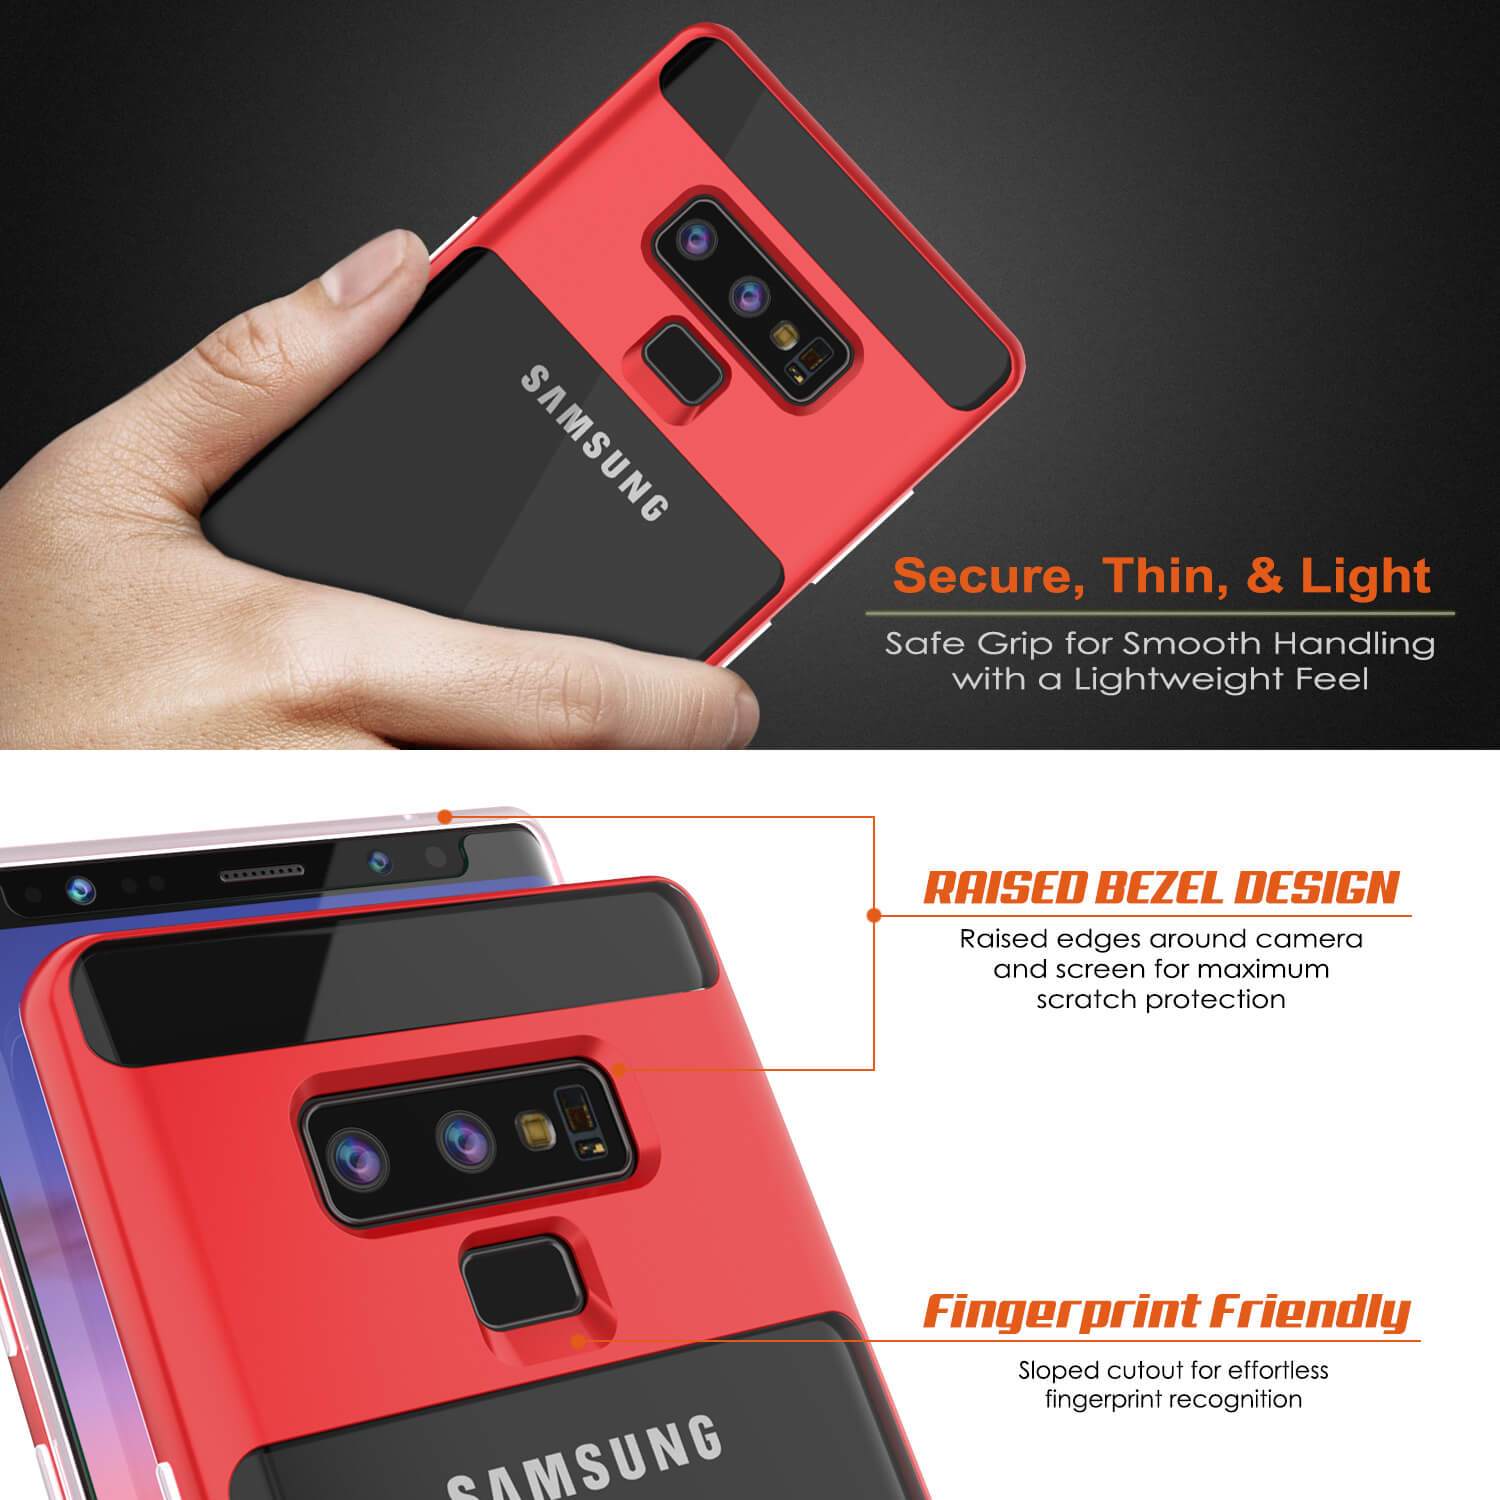 Galaxy Note 9 Lucid 3.0 PunkCase Armor Cover w/Integrated Kickstand and Screen Protector [Red] - PunkCase NZ